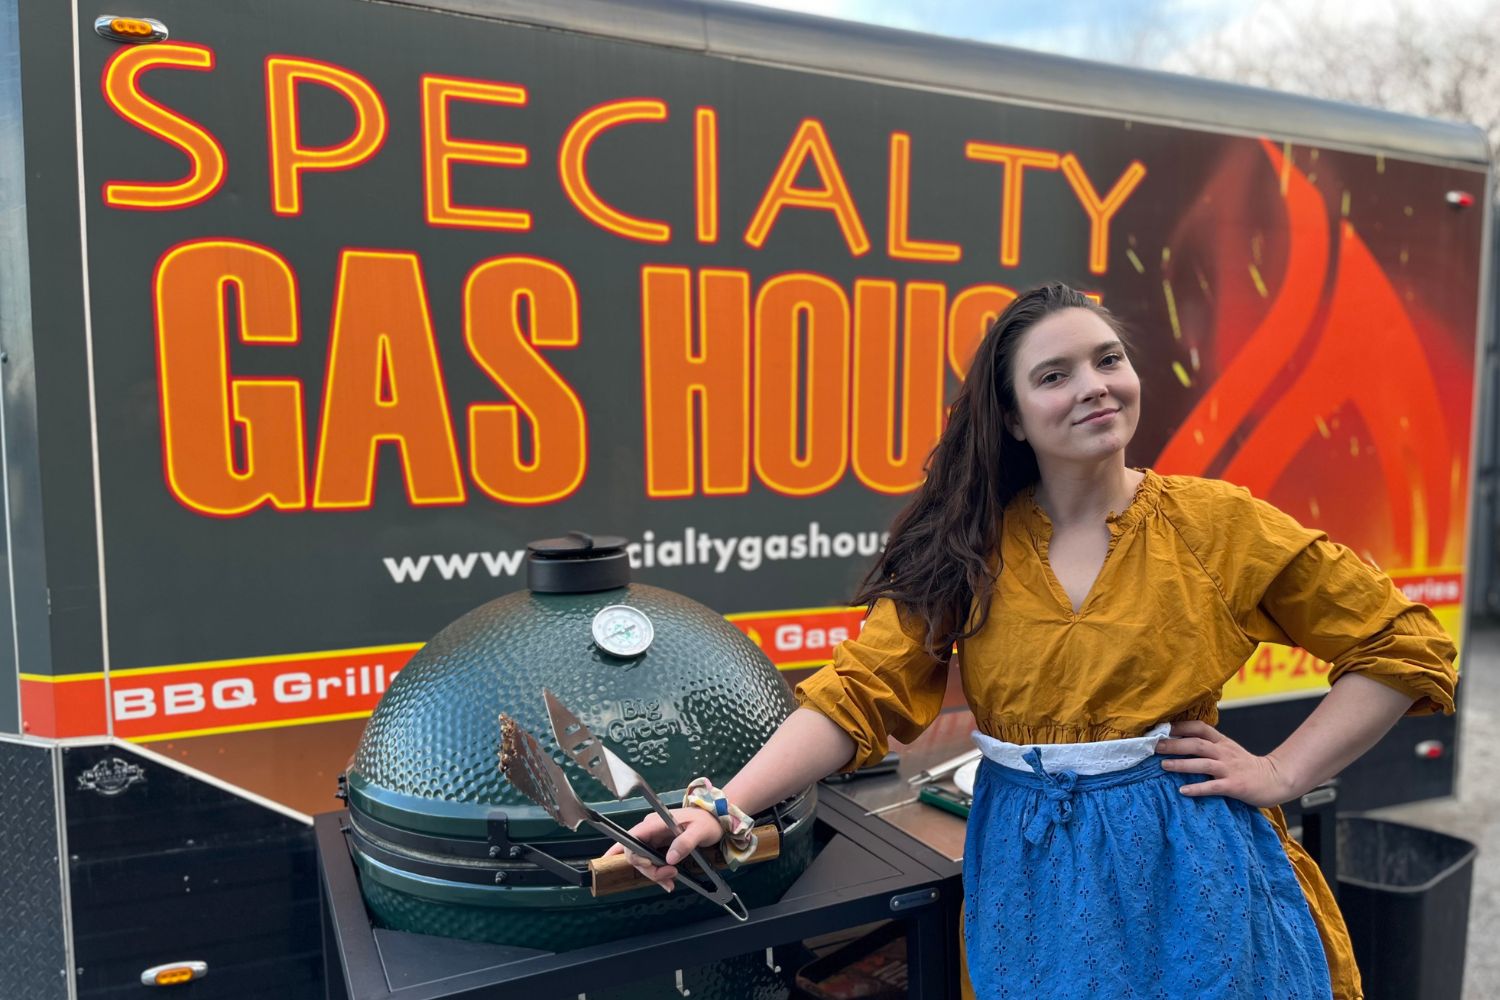 Chef Trudy King Cooking Class at Specialty Gas House with a Big Green Egg